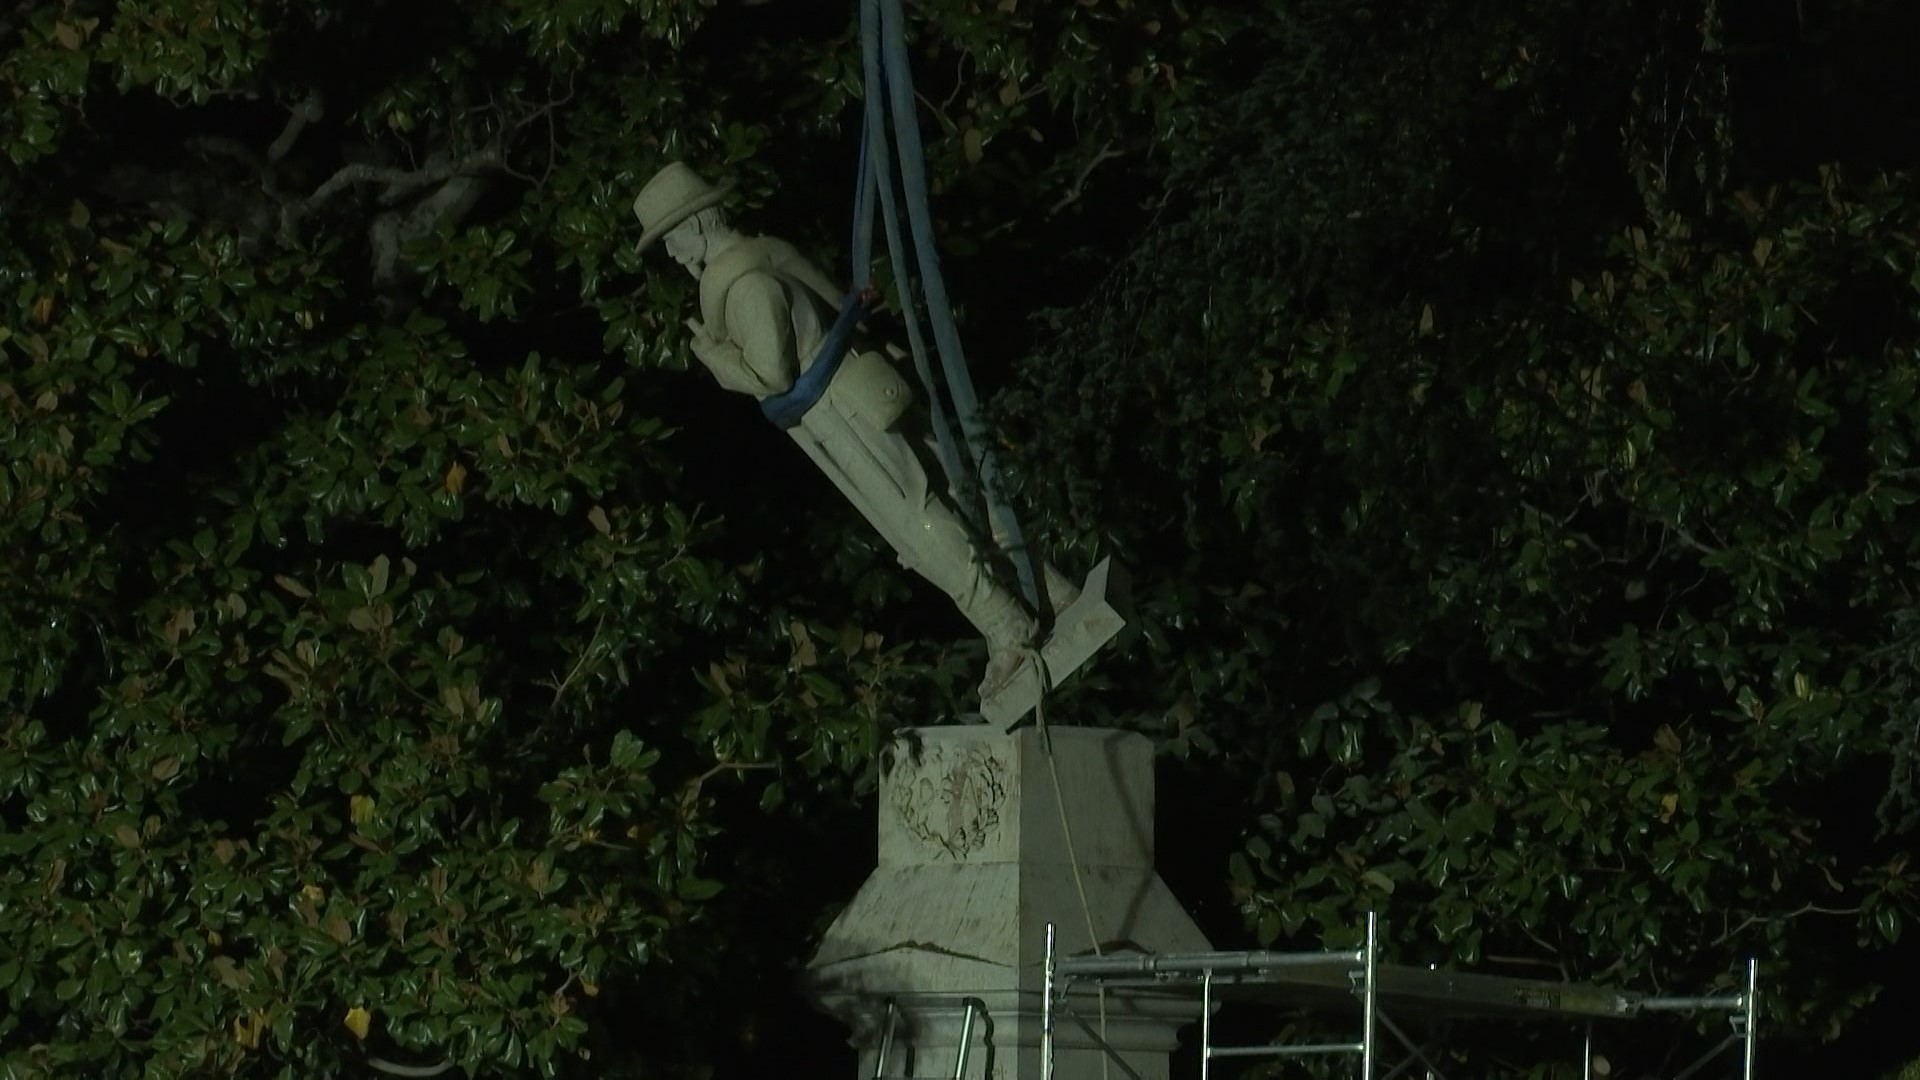 Our reporter was live last night at the removal of the Confederate statue from Madison County Courthouse.